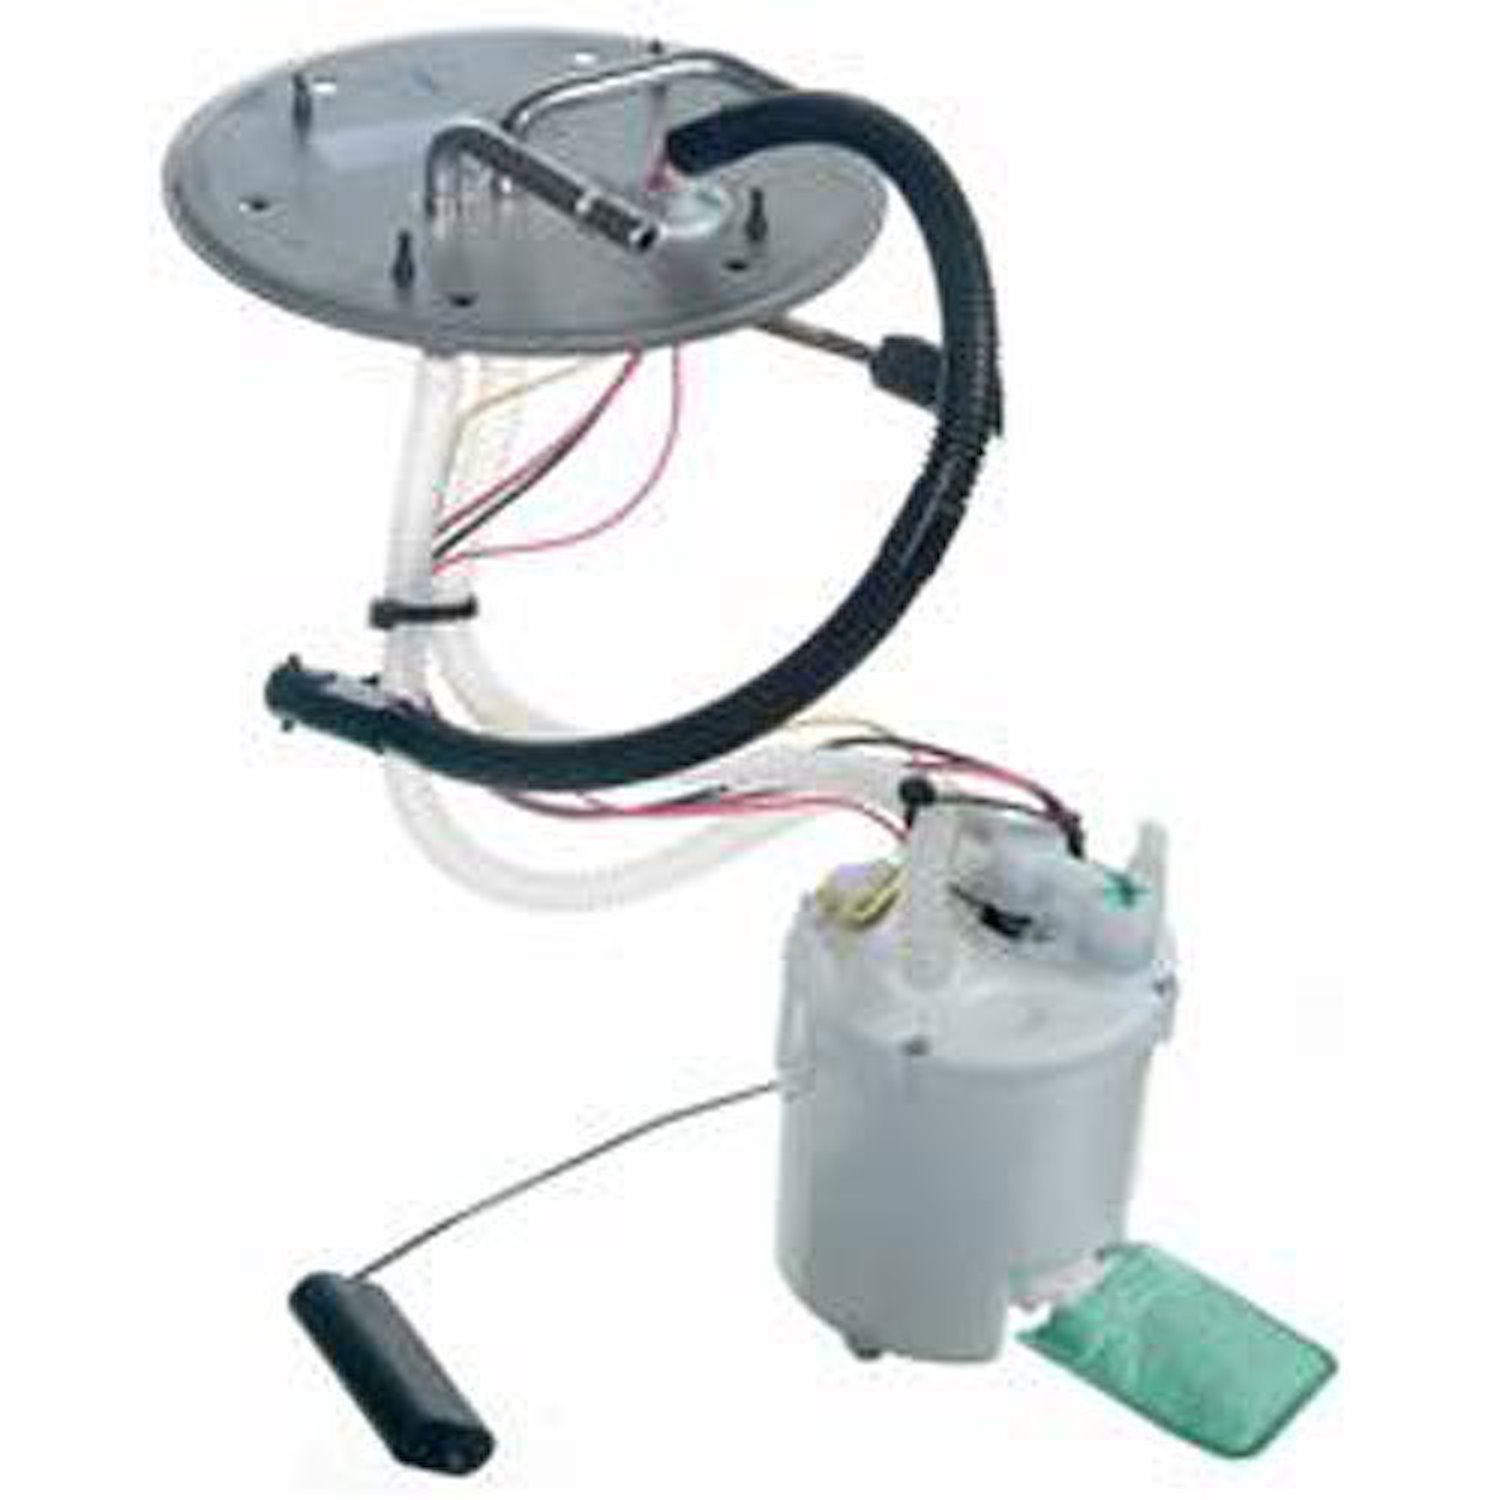 OE Ford Replacement Electric Fuel Pump Module Assembly 1999-04 Ford F350/F450/F550 Super Duty 5.4L/6.8L V8